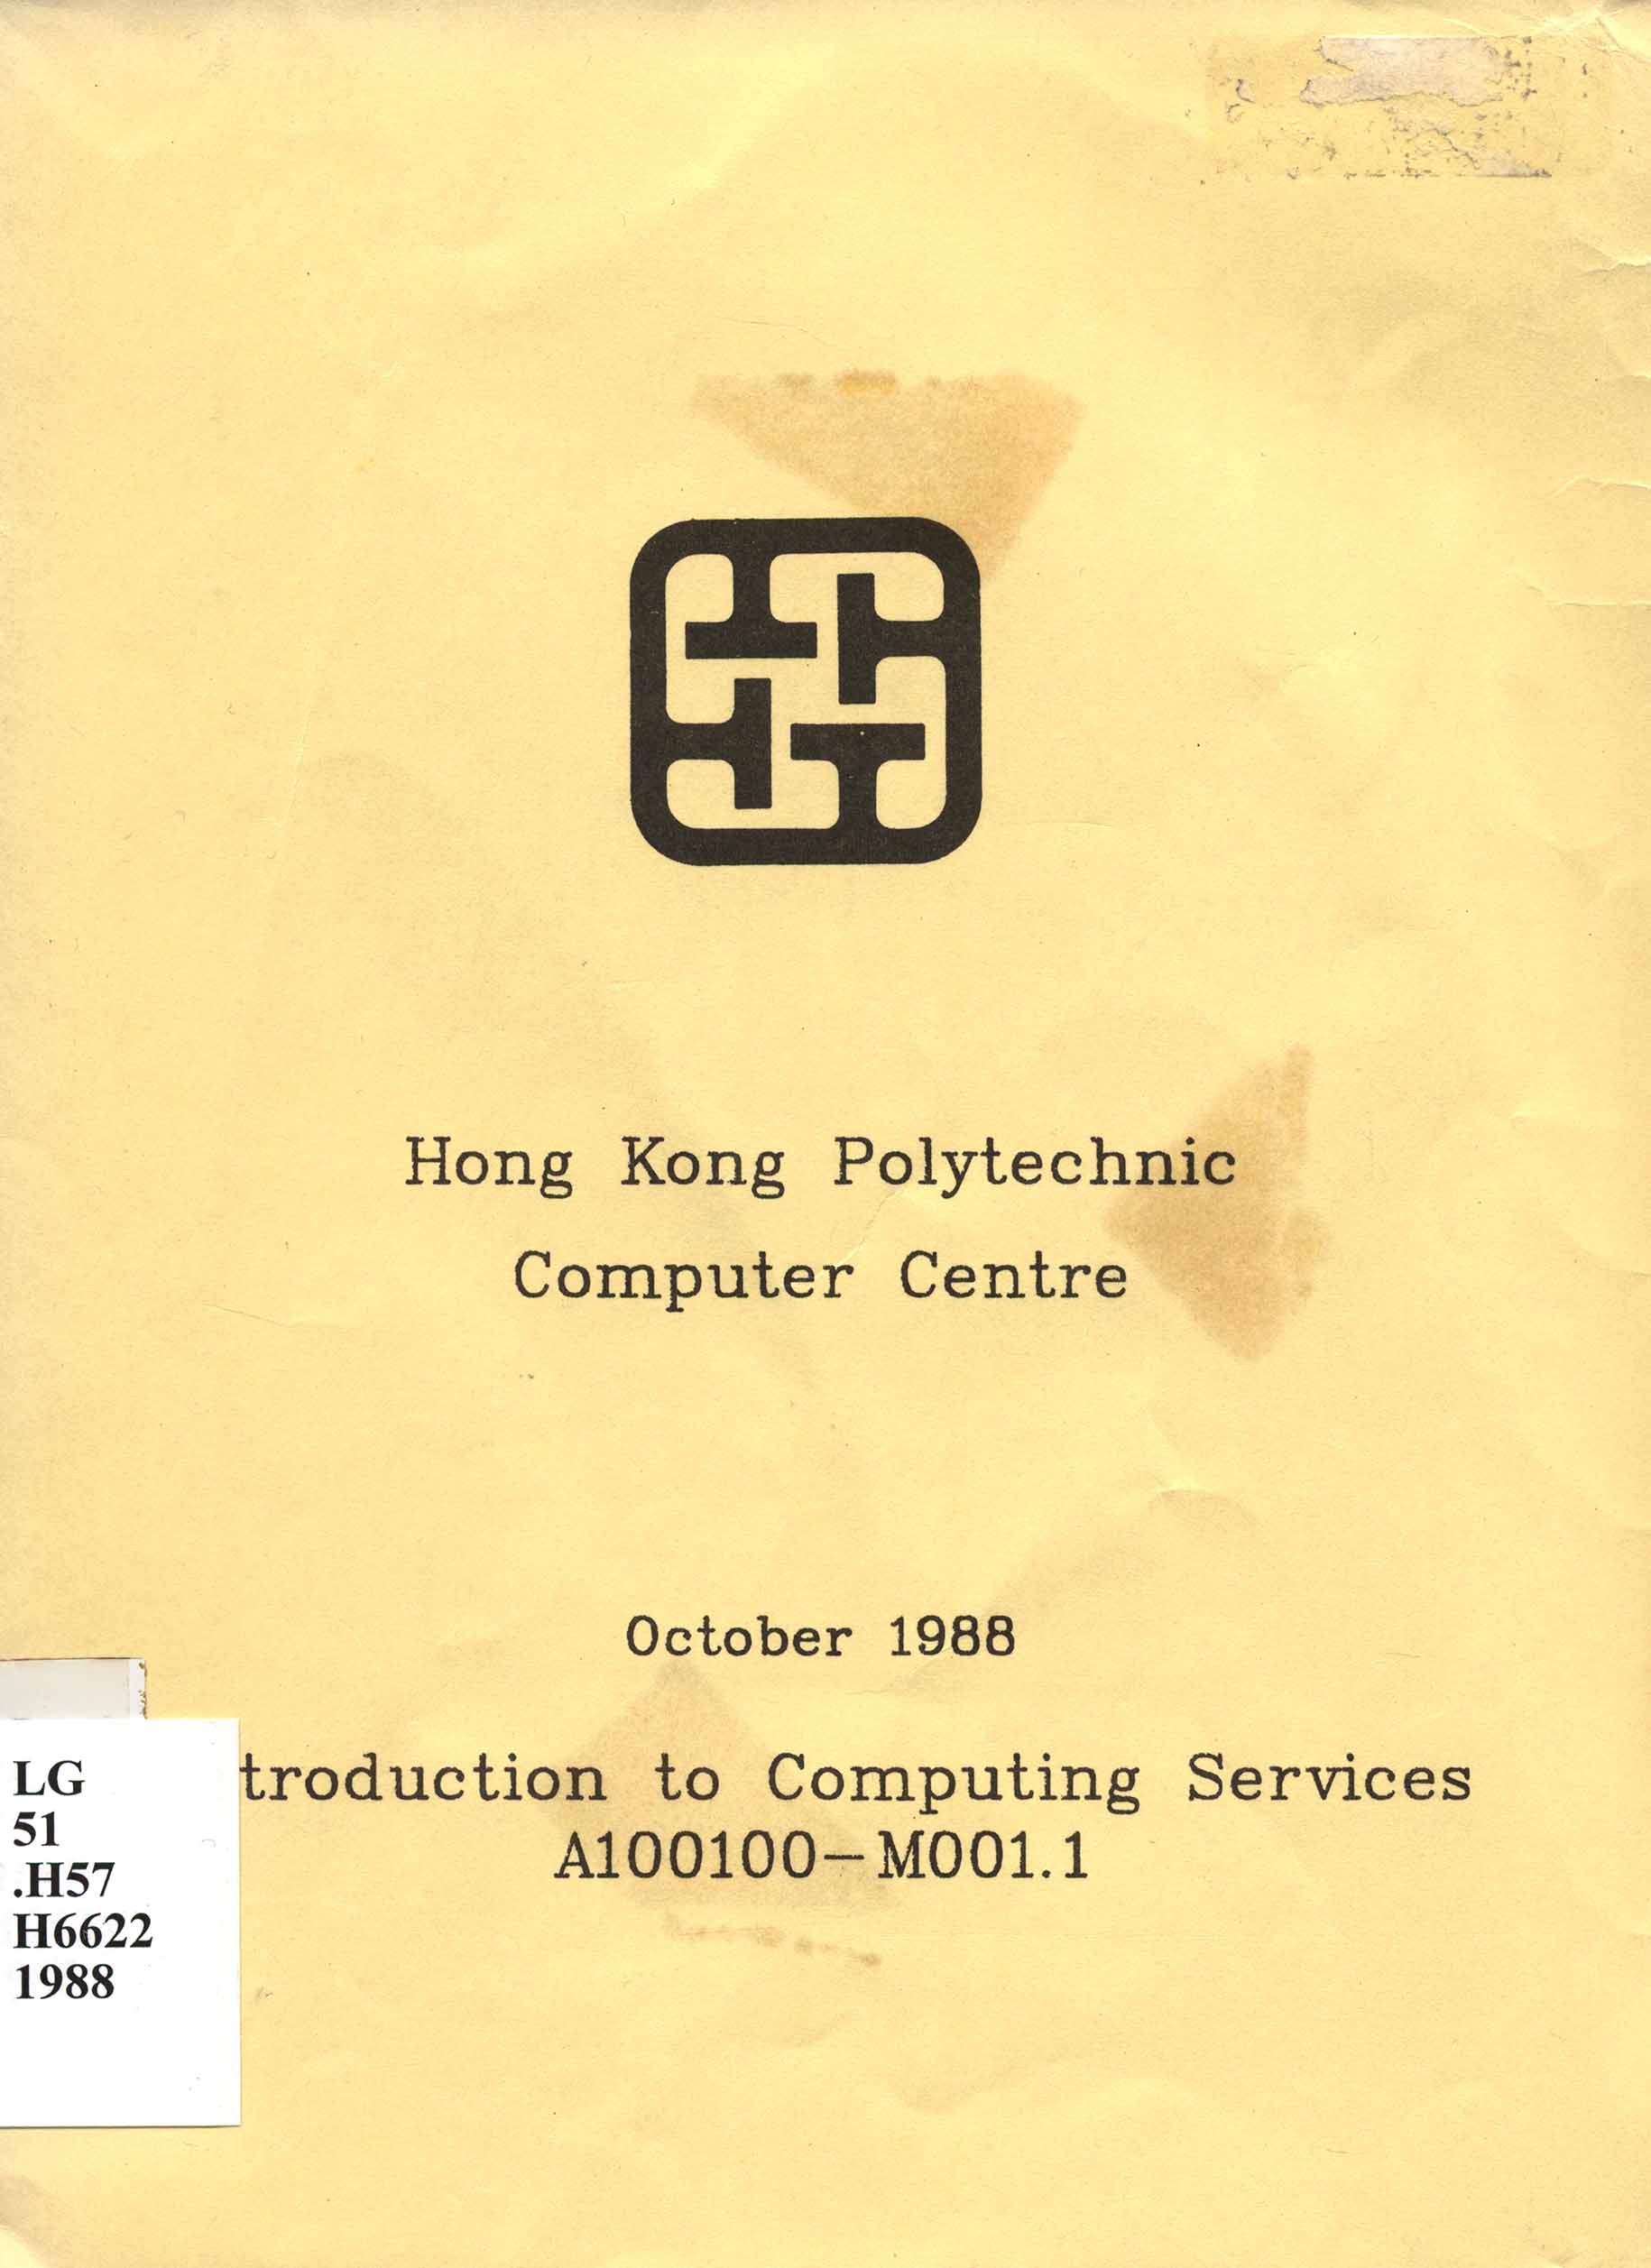 Introduction to computing services [1988]